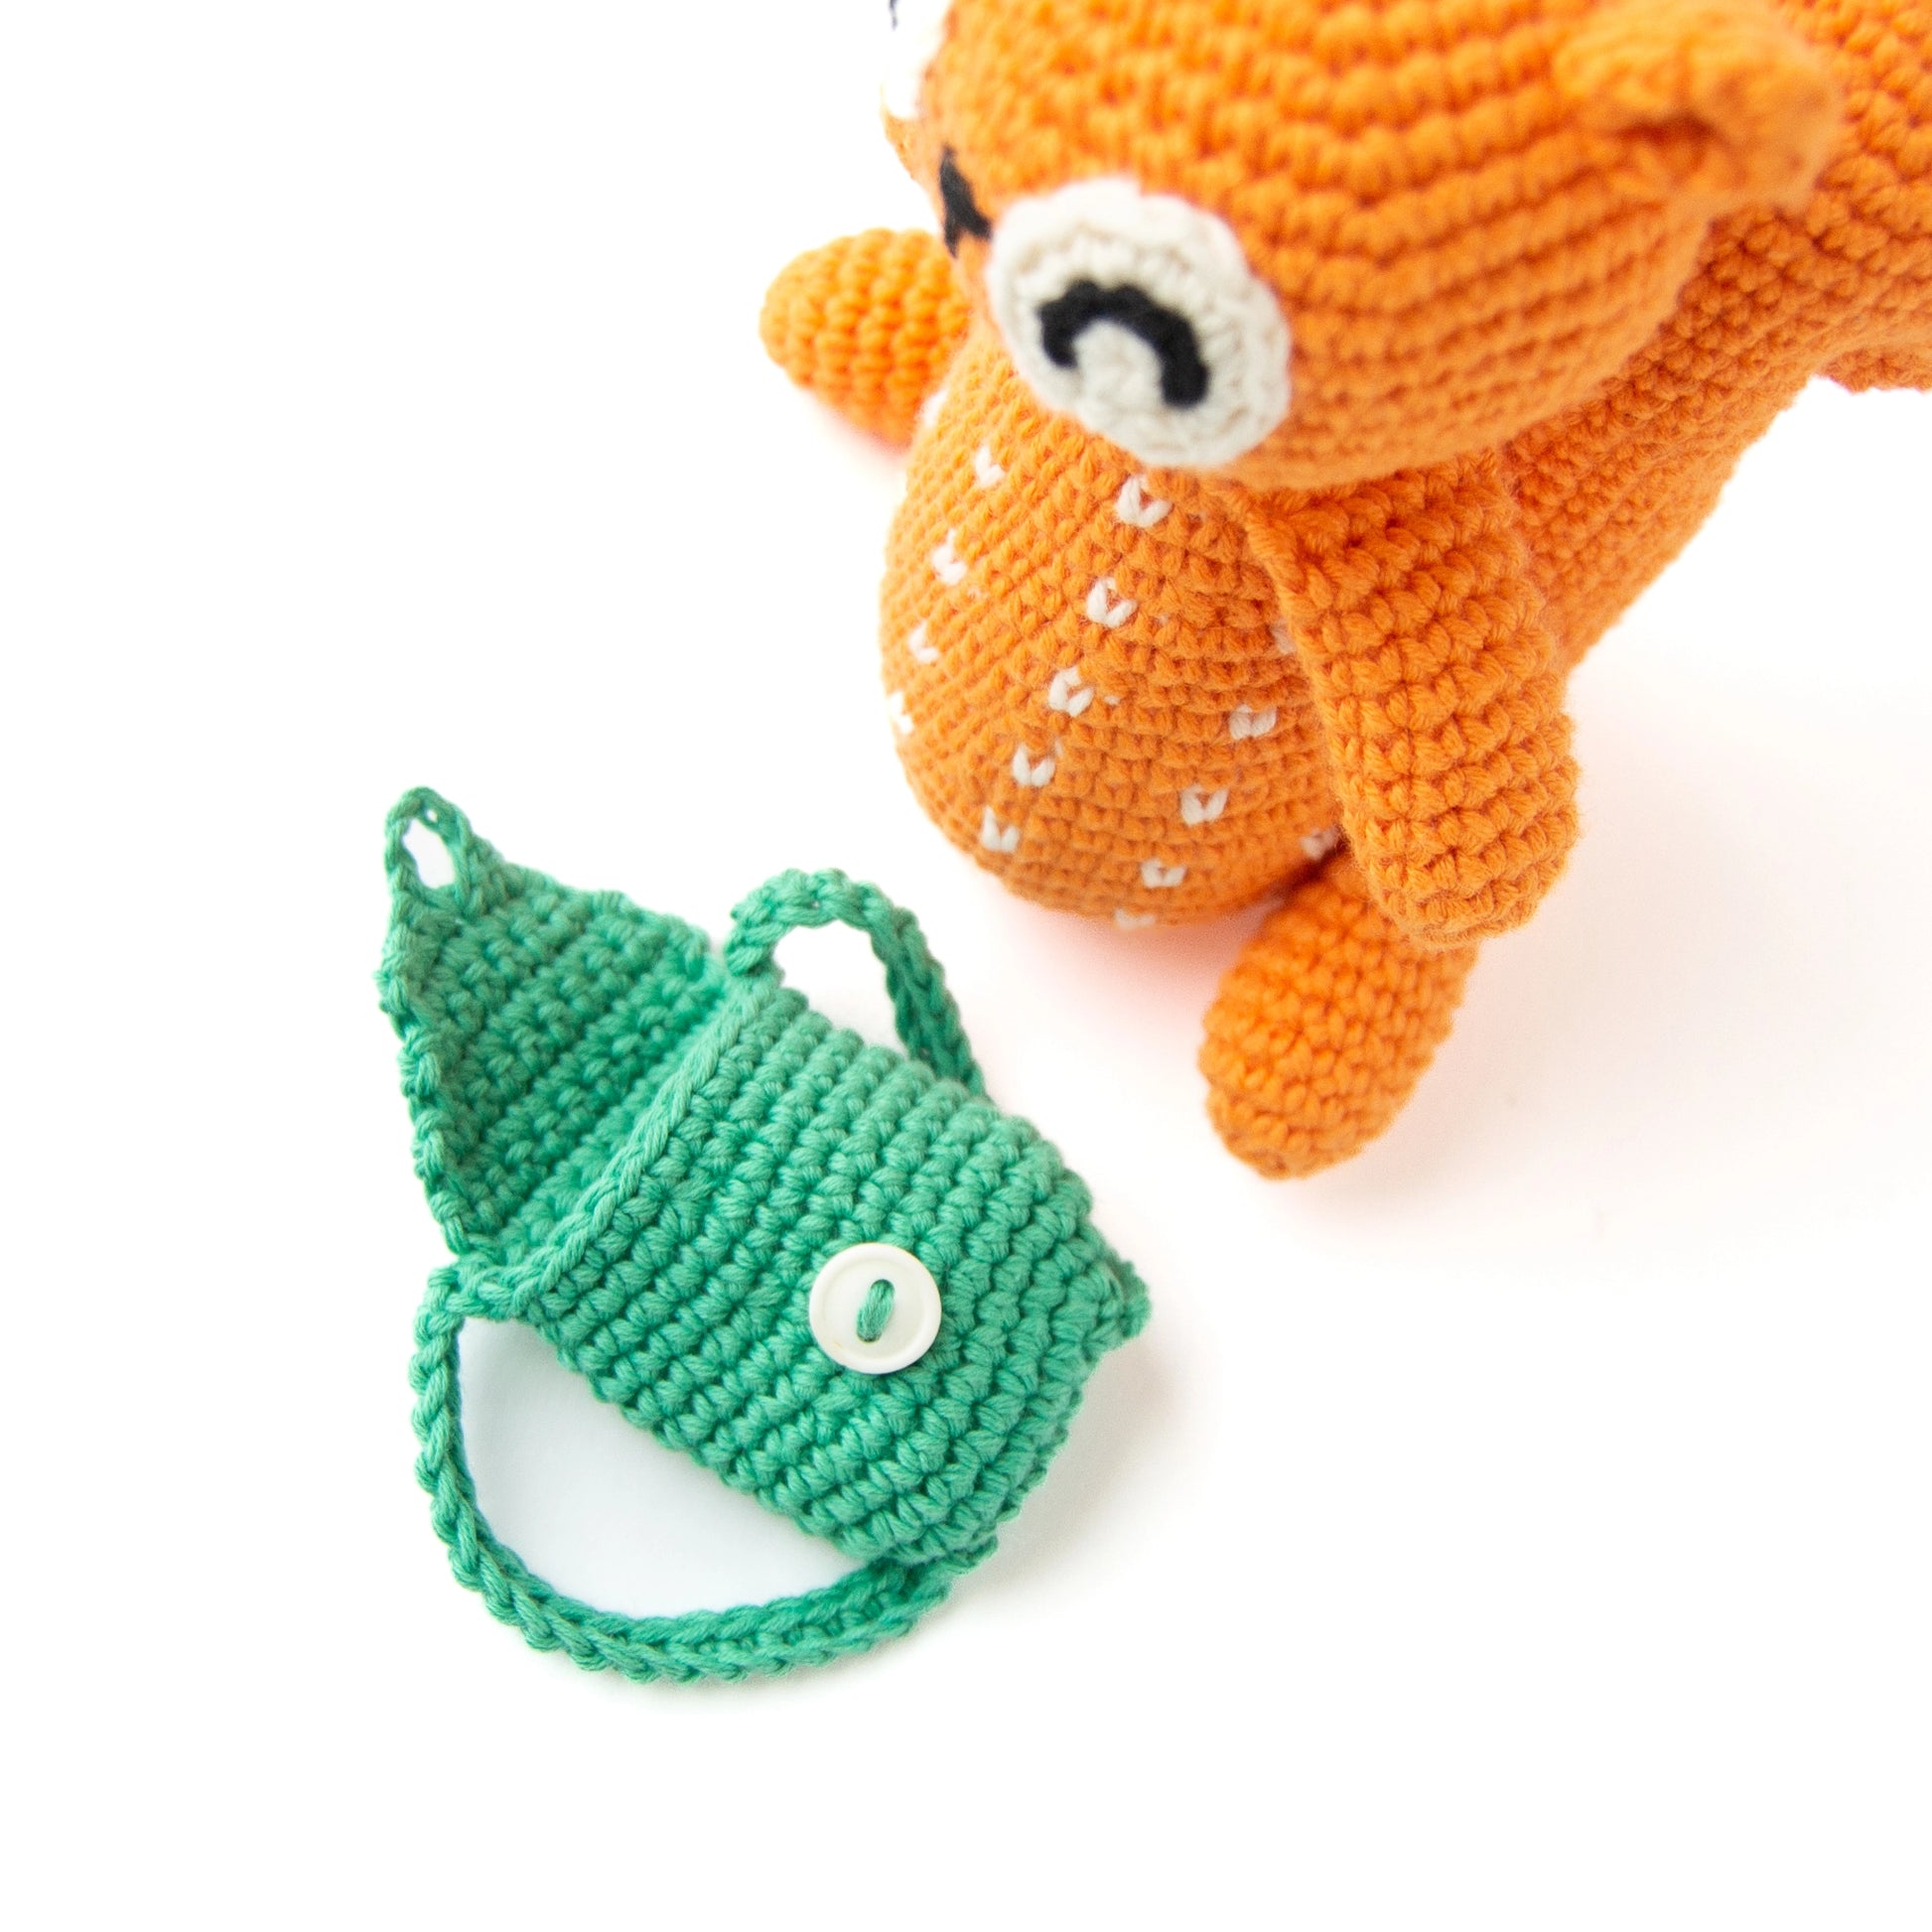 Crocheted orange squirrel with a green backpack in front of it